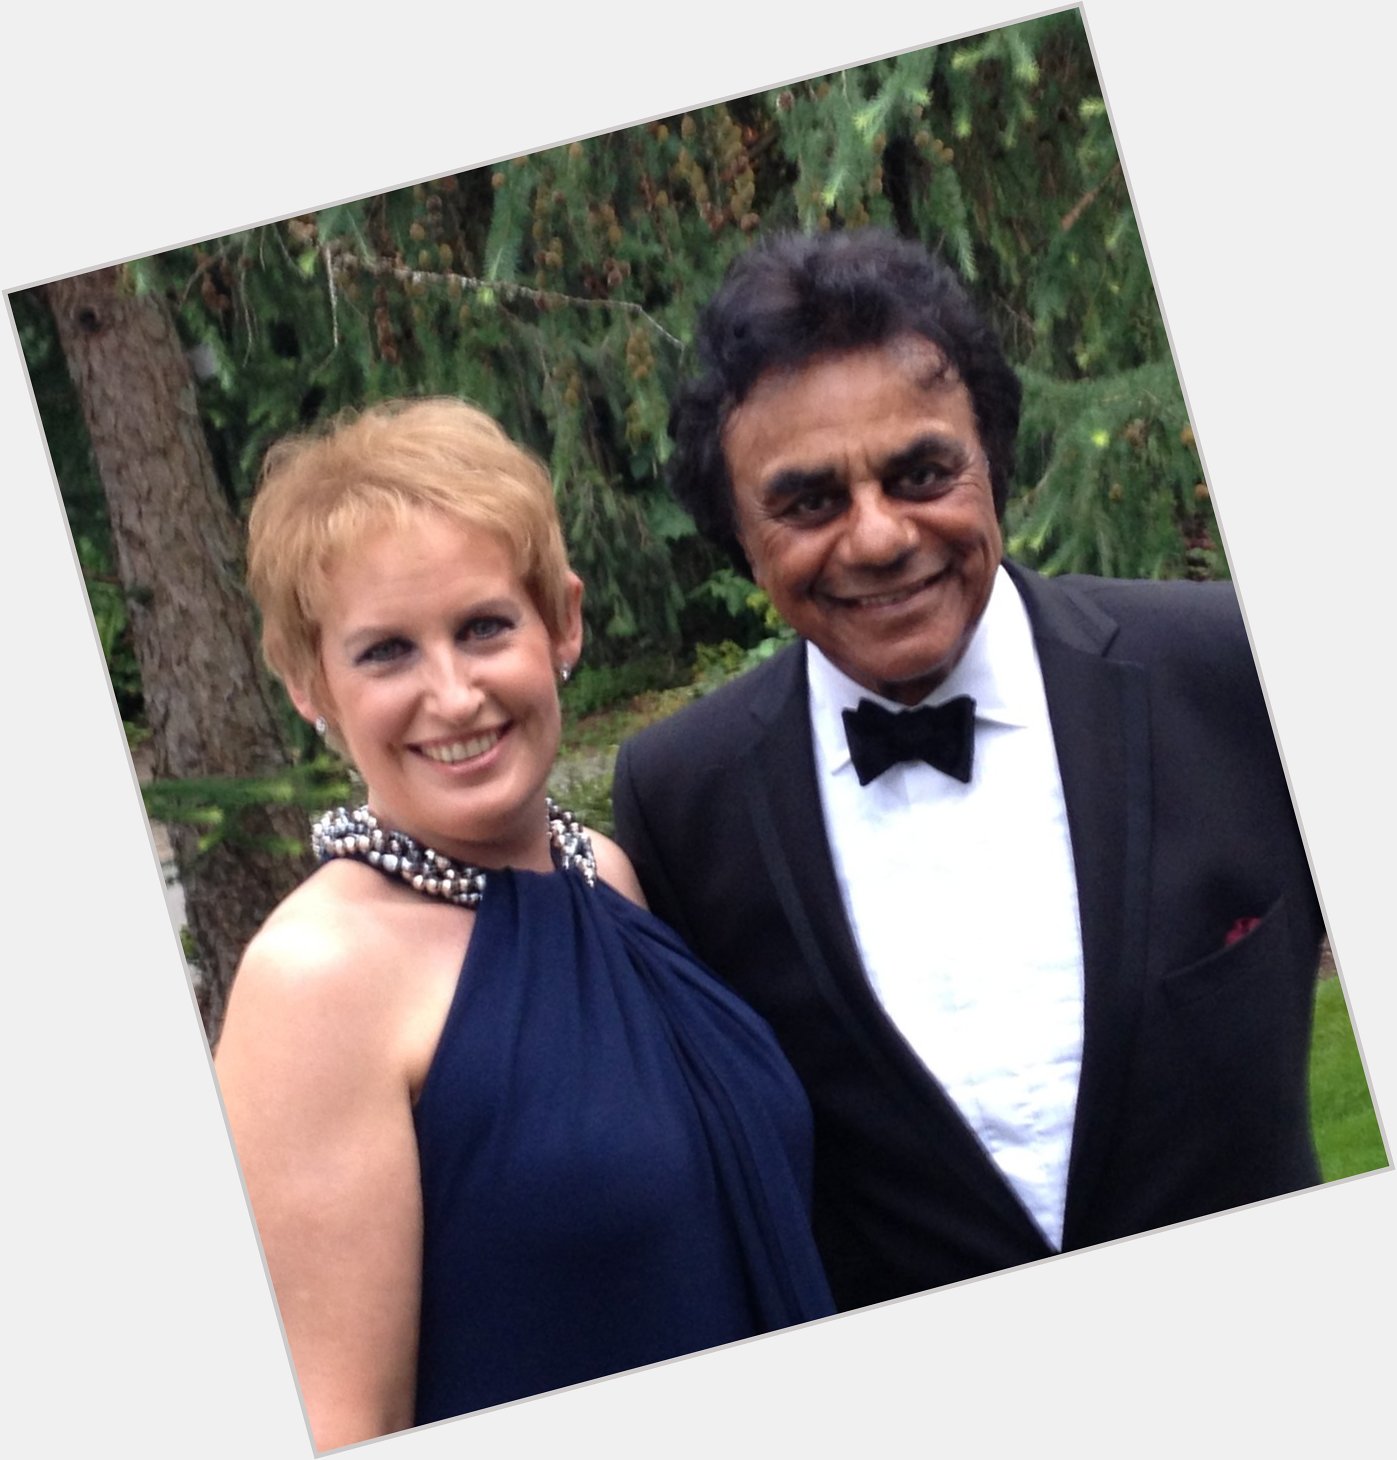 Happy Birthday to one of my favorite people on the planet, Johnny Mathis! 